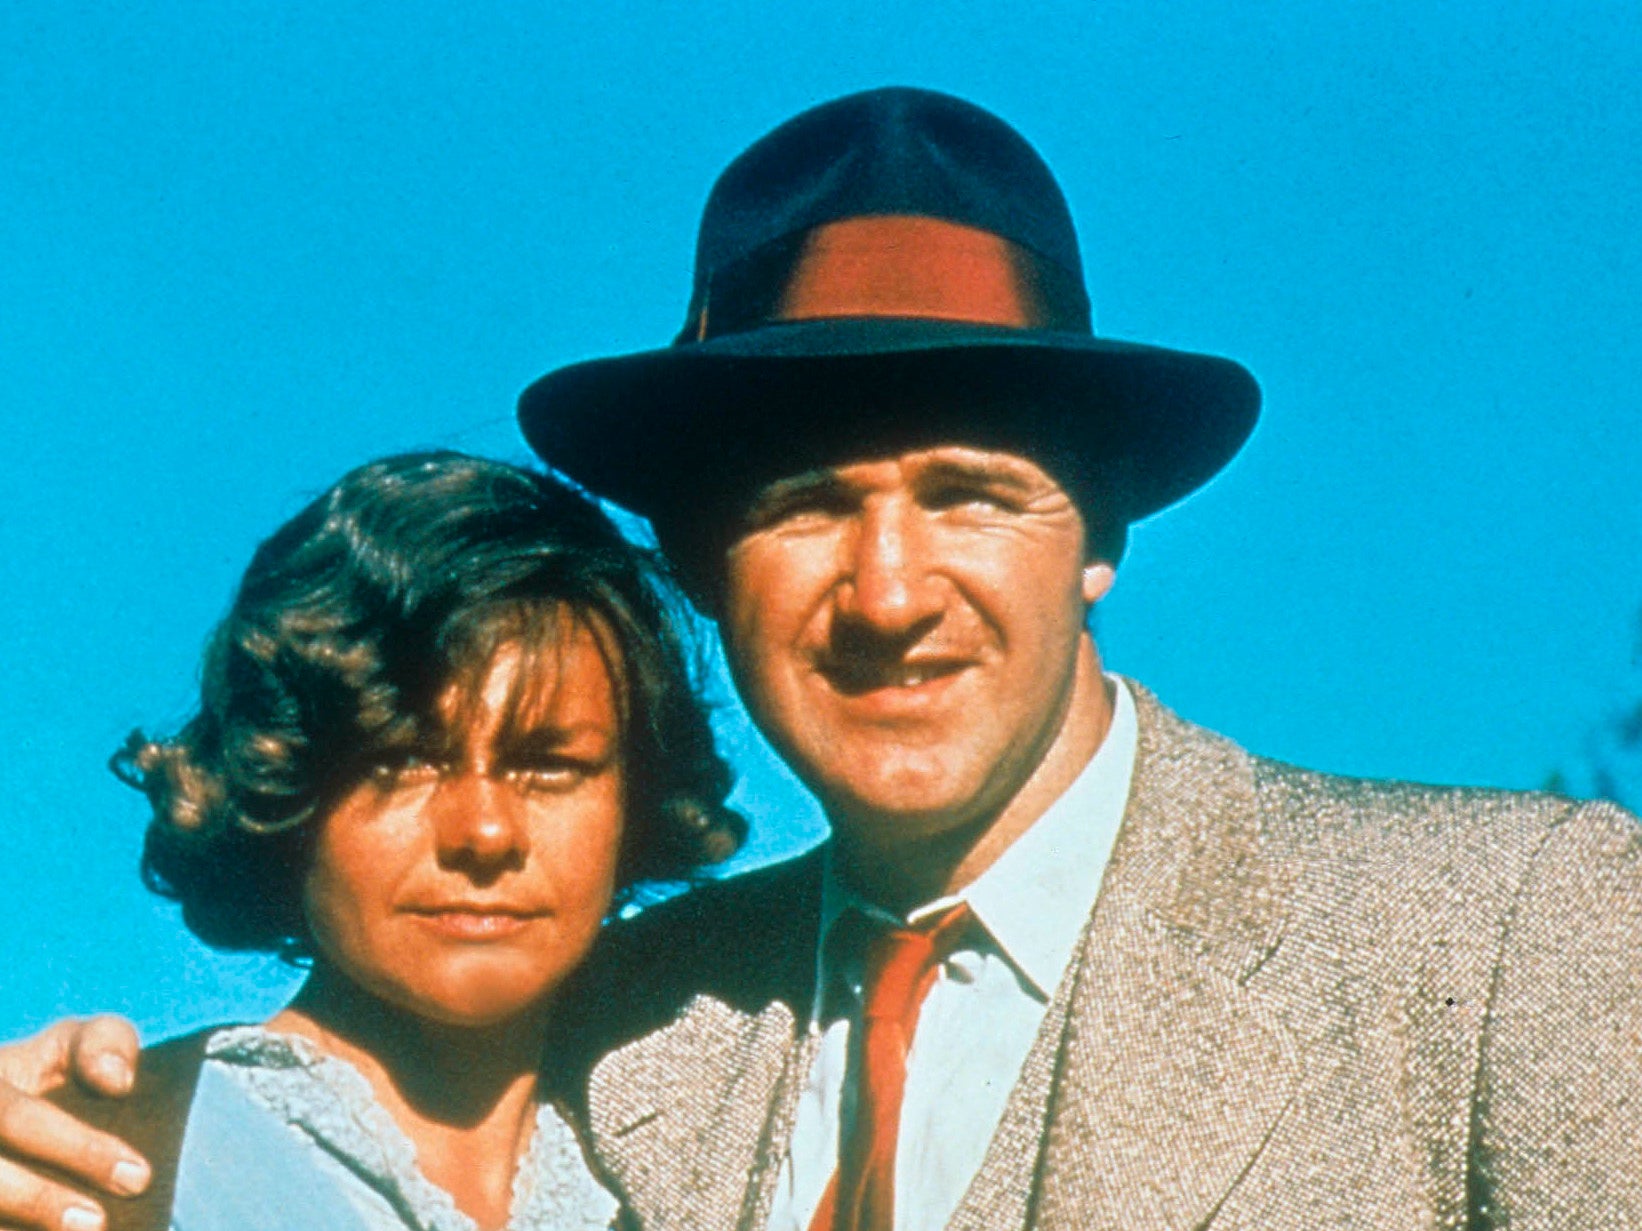 Gene Hackman, Actor - At sixteen years, Hackman left home to join